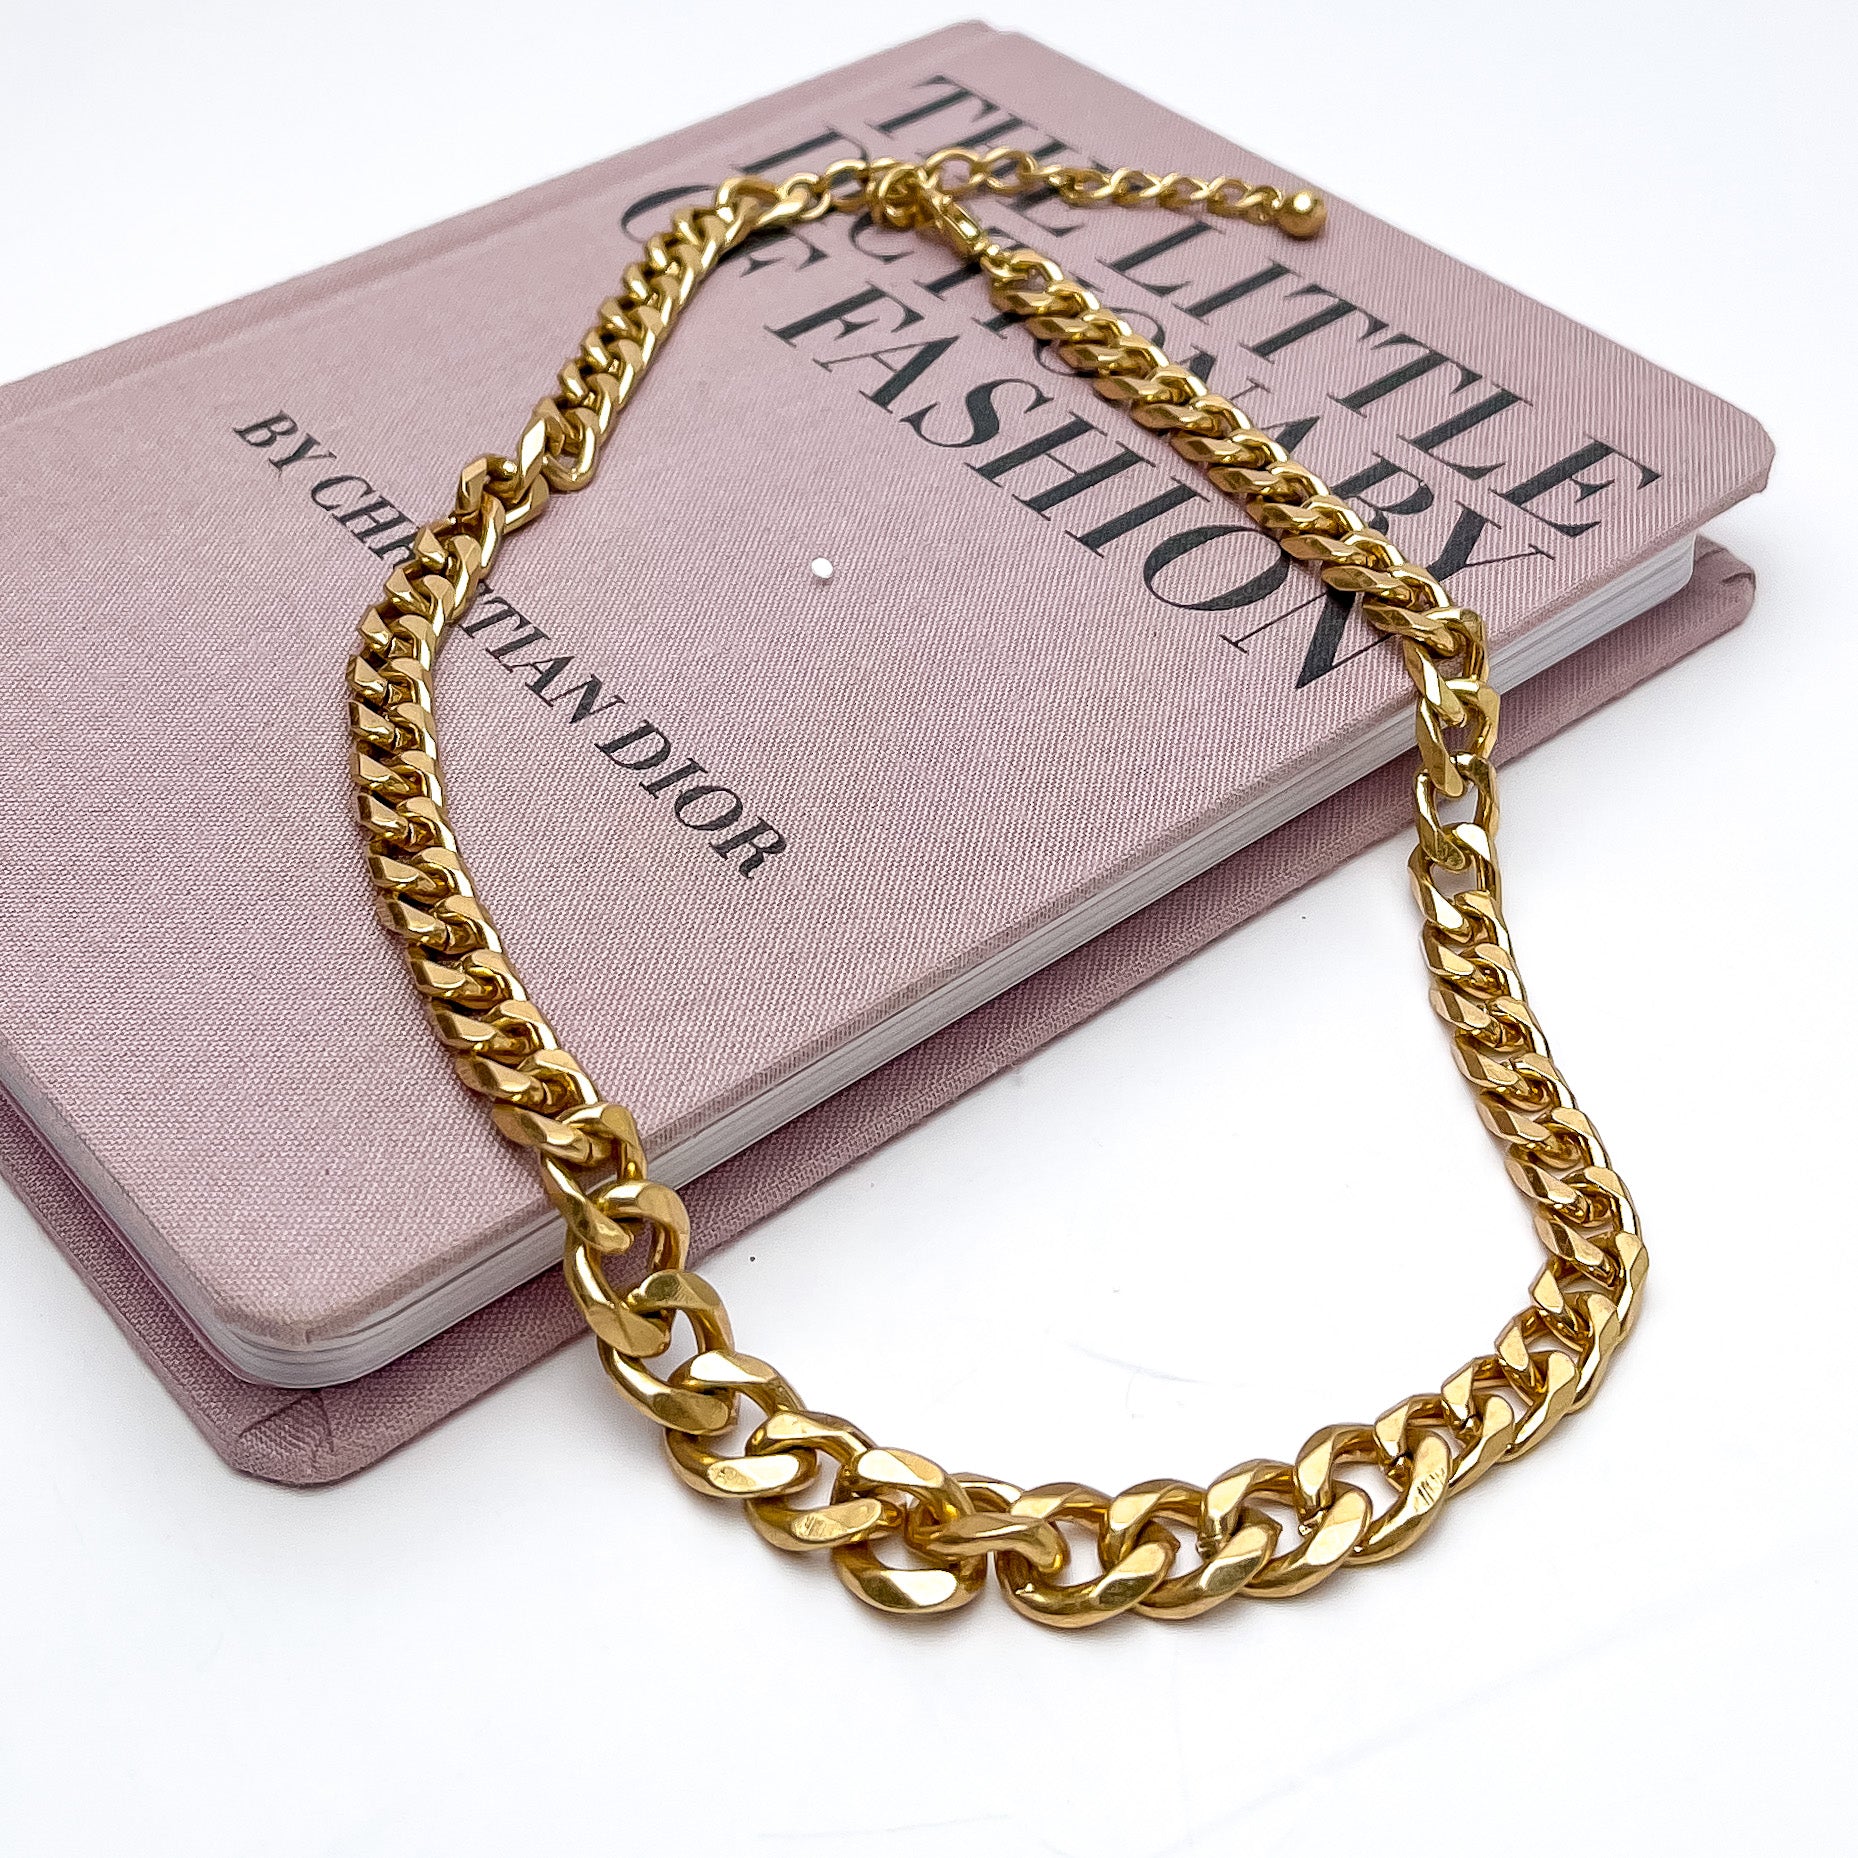 Go to Gold Tone Chain Necklace. This necklace is on a pink book with a white background.